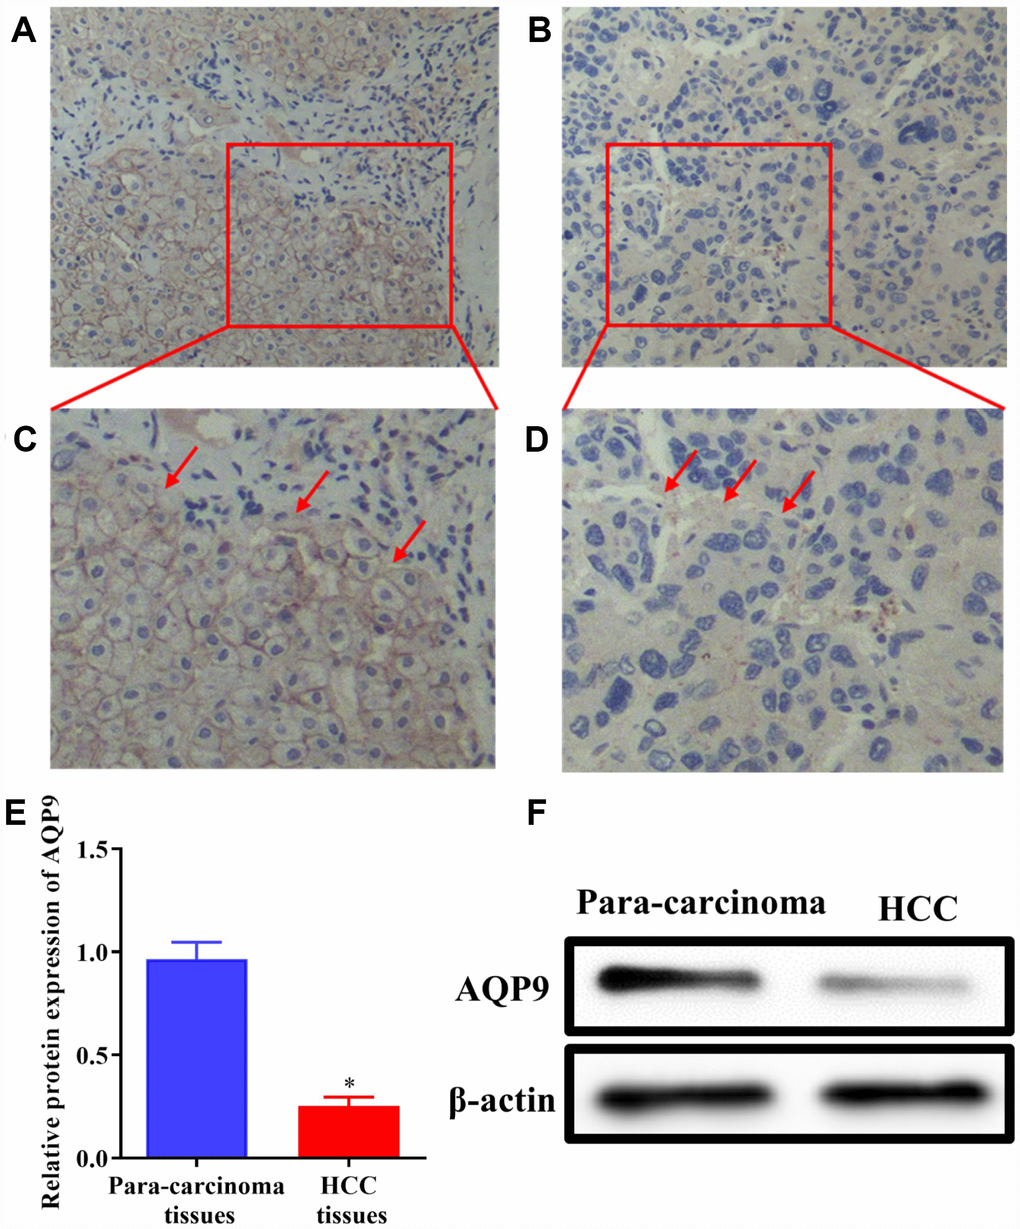 The expression of AQP9 was reduced in HCC samples. (A–D) The levels of AQP9 were examined in HCC and paired non-tumor tissues by immunohistochemistry analysis (magnificationx200 and x400). (E and F) The levels of AQP9 were also examined using western blotting. The results were represented as mean ± SD. P